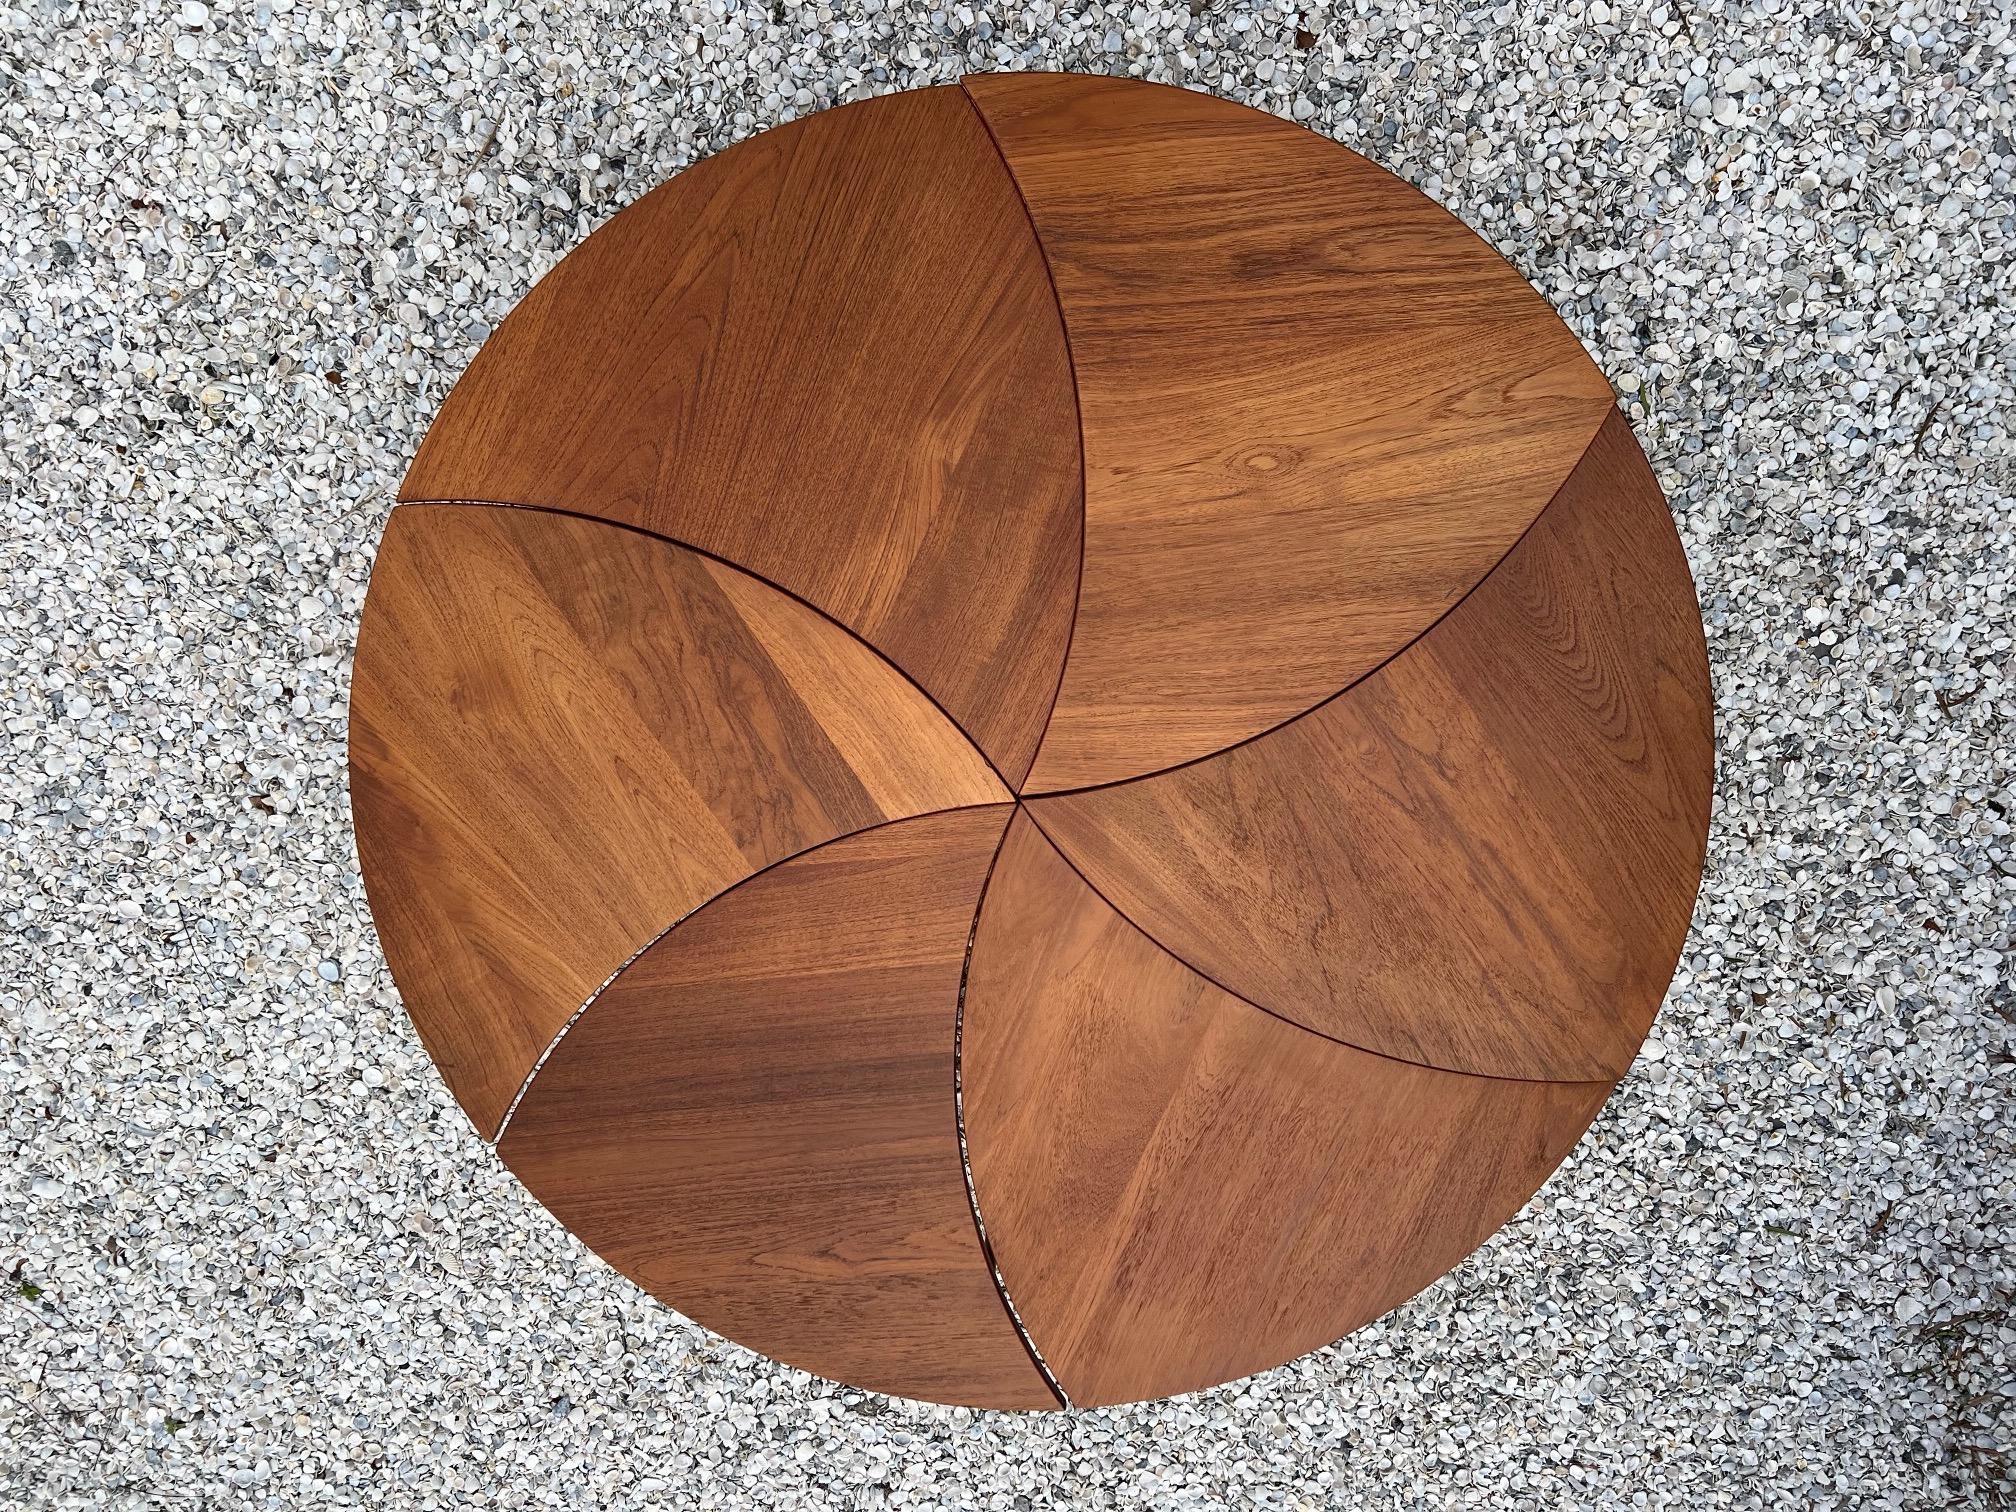 A fun pinwheel coffee table by Peter Hvidt. Composed of six (6) separate tables and limitless possibilities for arrangement. Made of teak and brass.